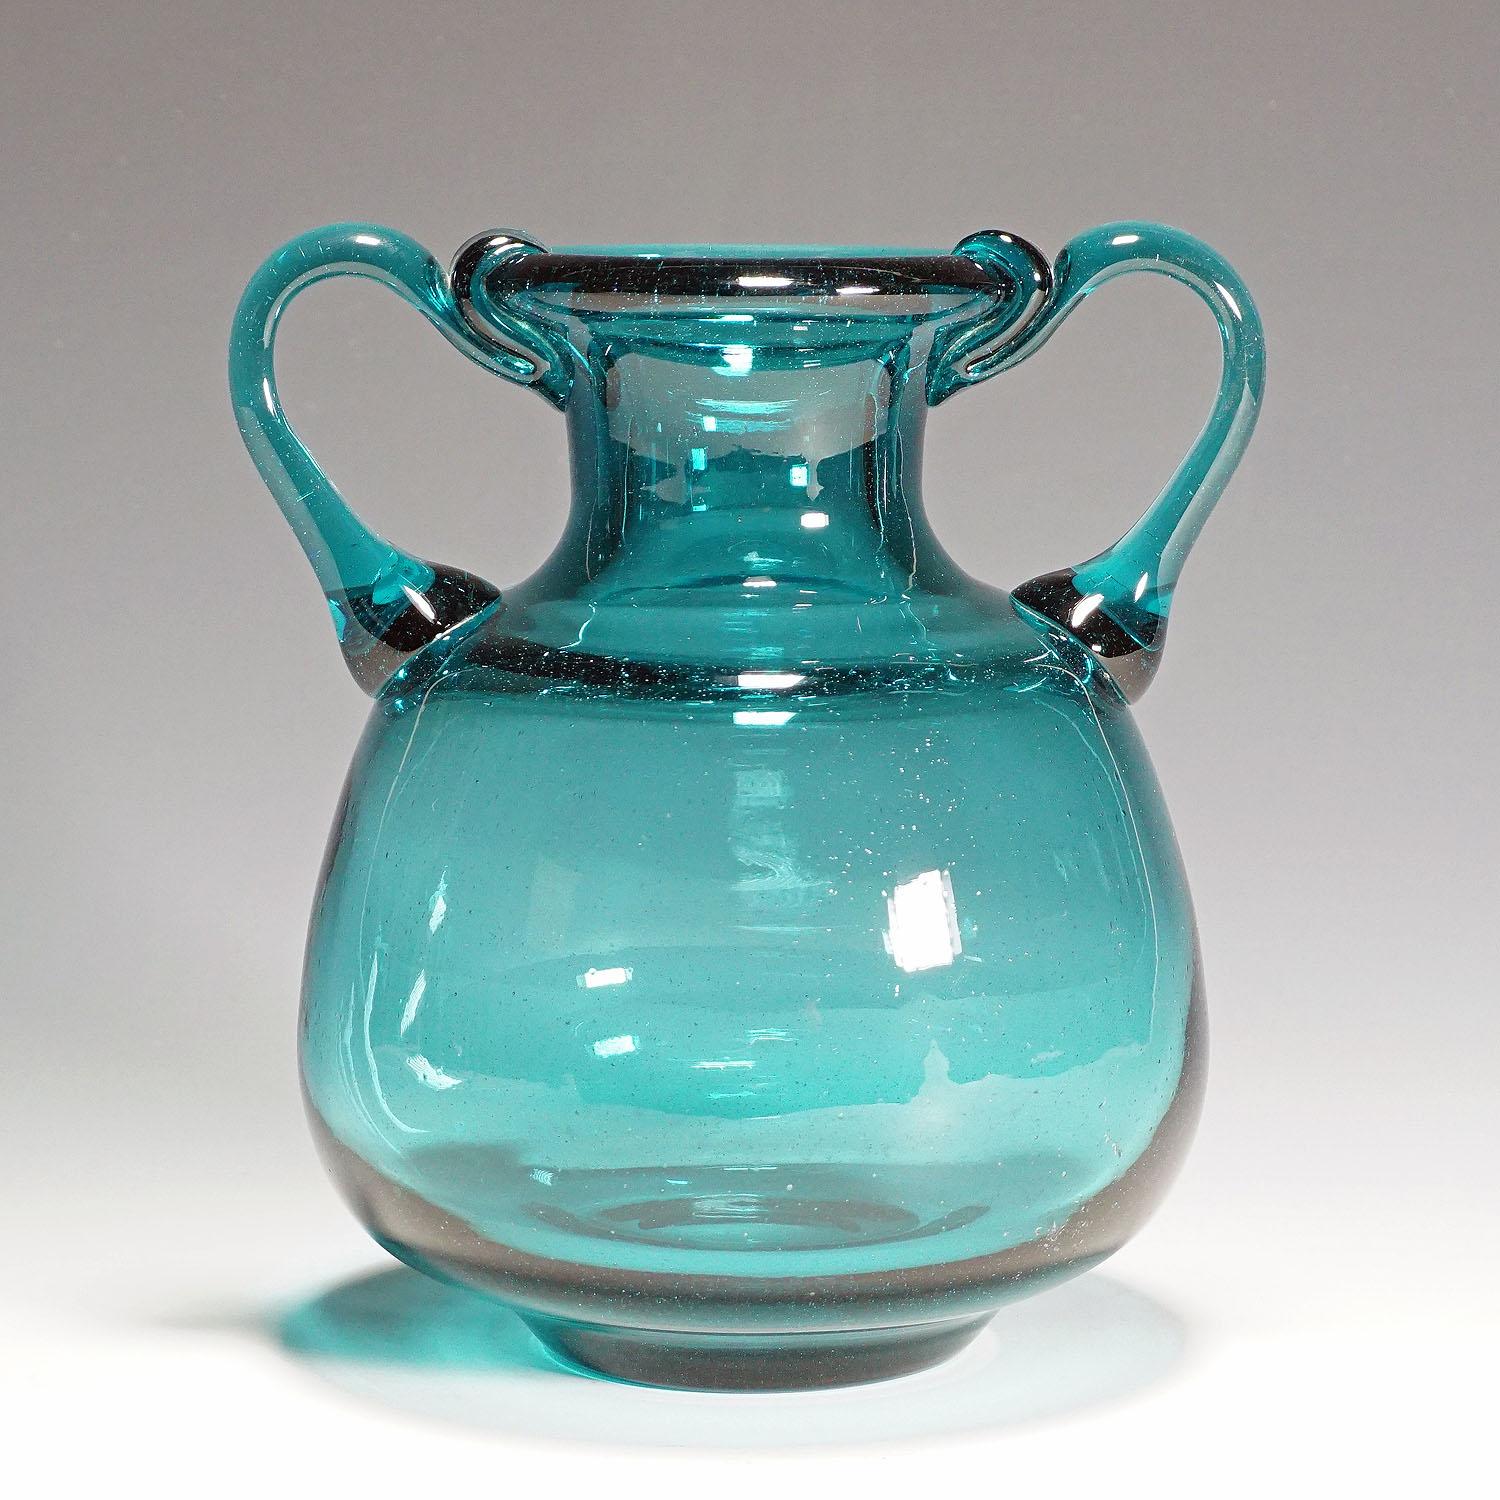 A nice glass vase with two handles. Manufactured in massive petrol colored glass with fine air bubbles inside. Manufactured by the Ichendorfer Glassworks, Germany around 1960. The Ichendorfer glass works issued a series of replicas of antique roman